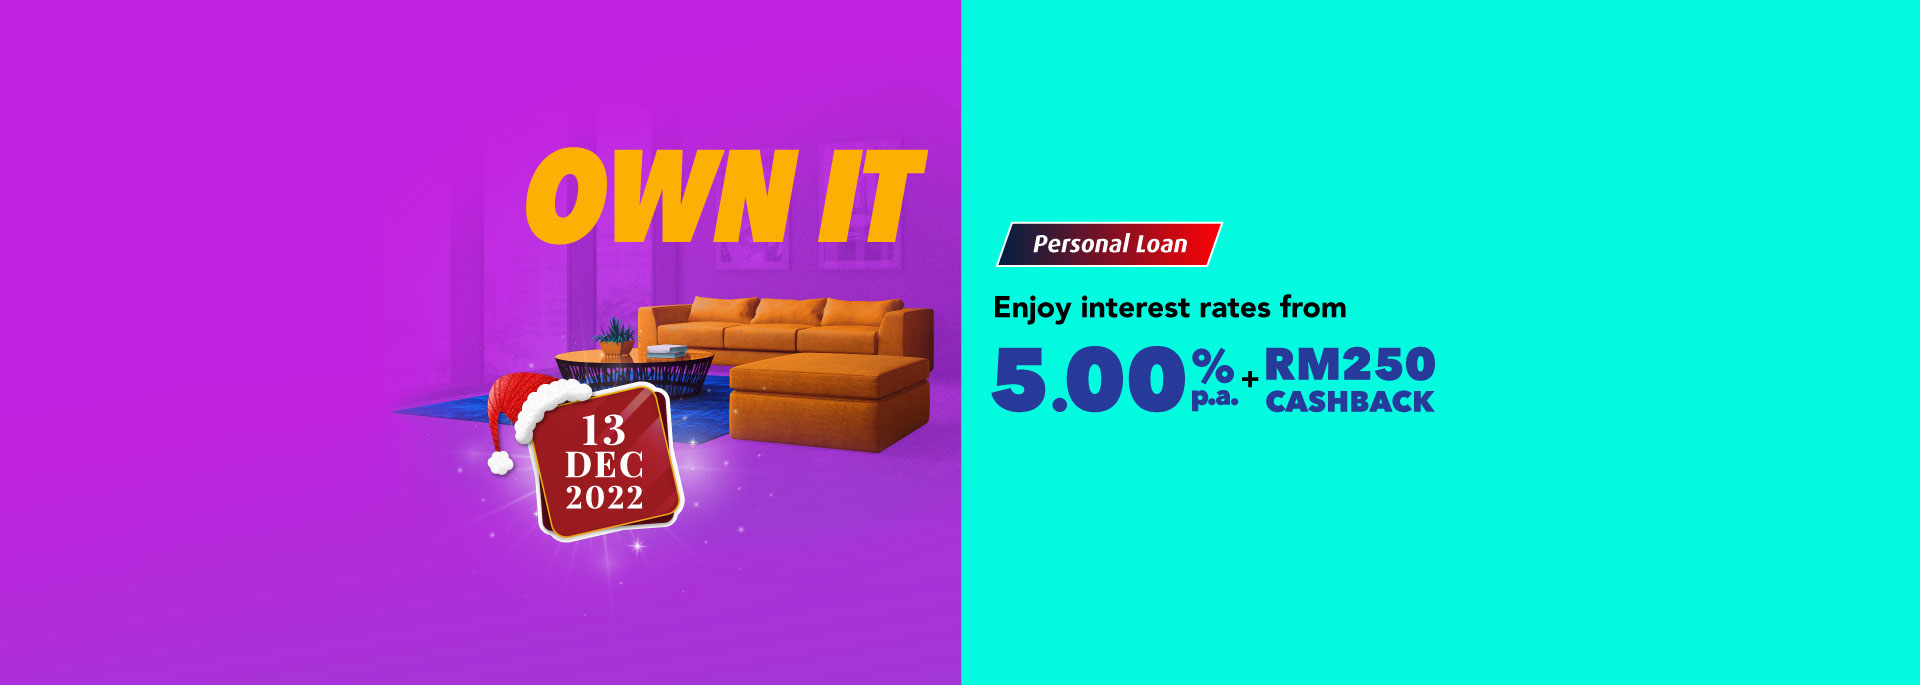 Personal Loan Connect Christmas Campaign